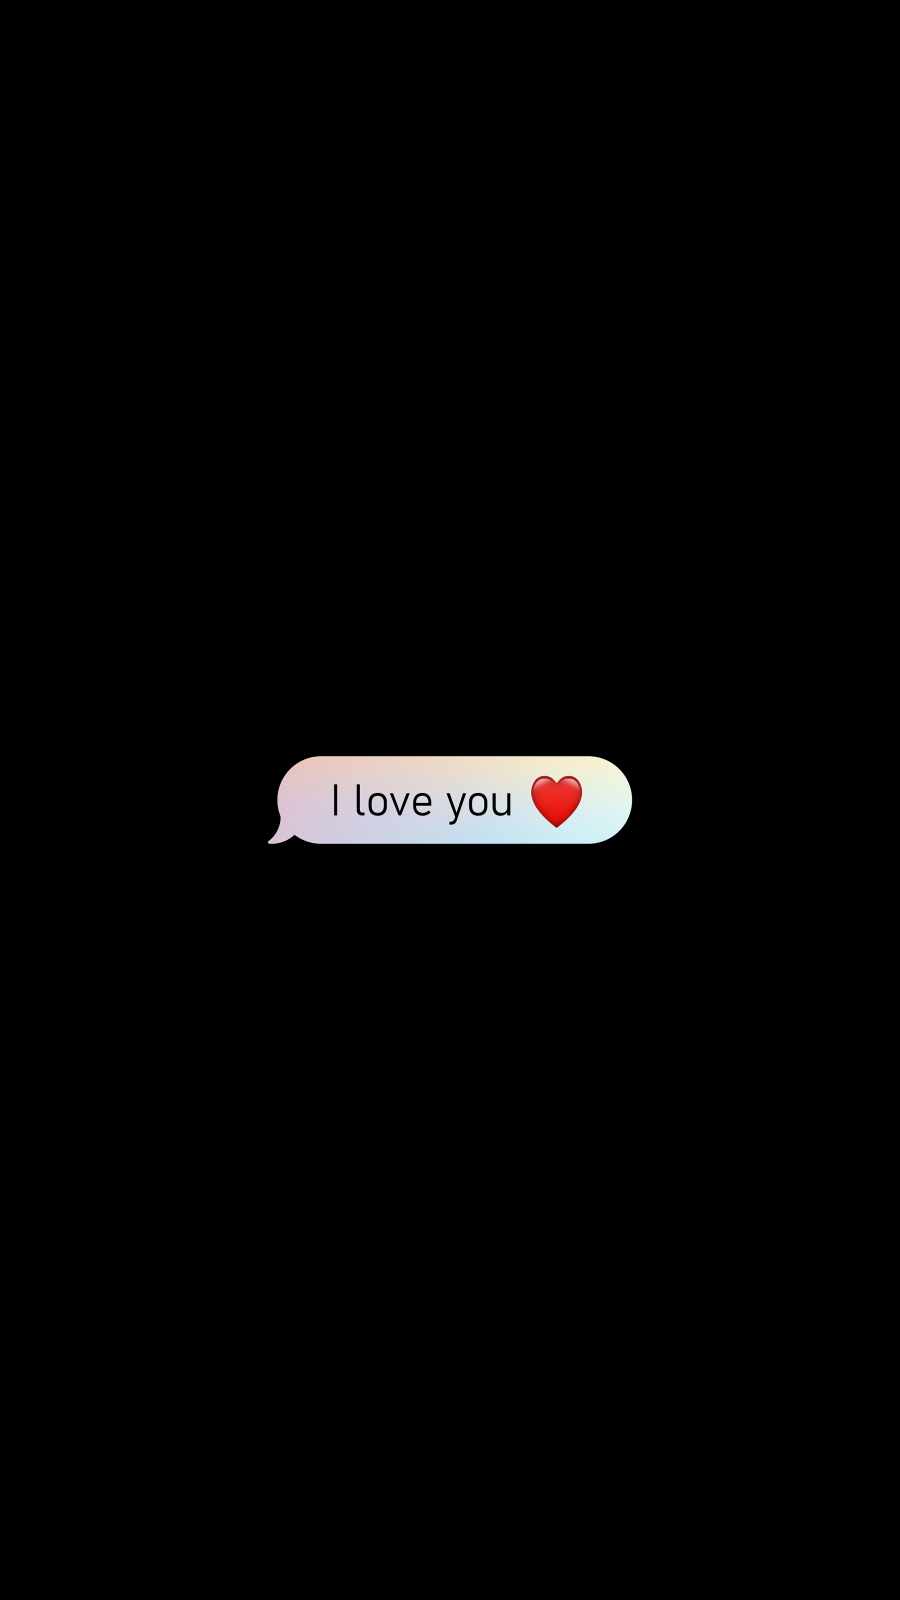 I Love You Texting IPhone Wallpaper - IPhone Wallpapers : iPhone ...